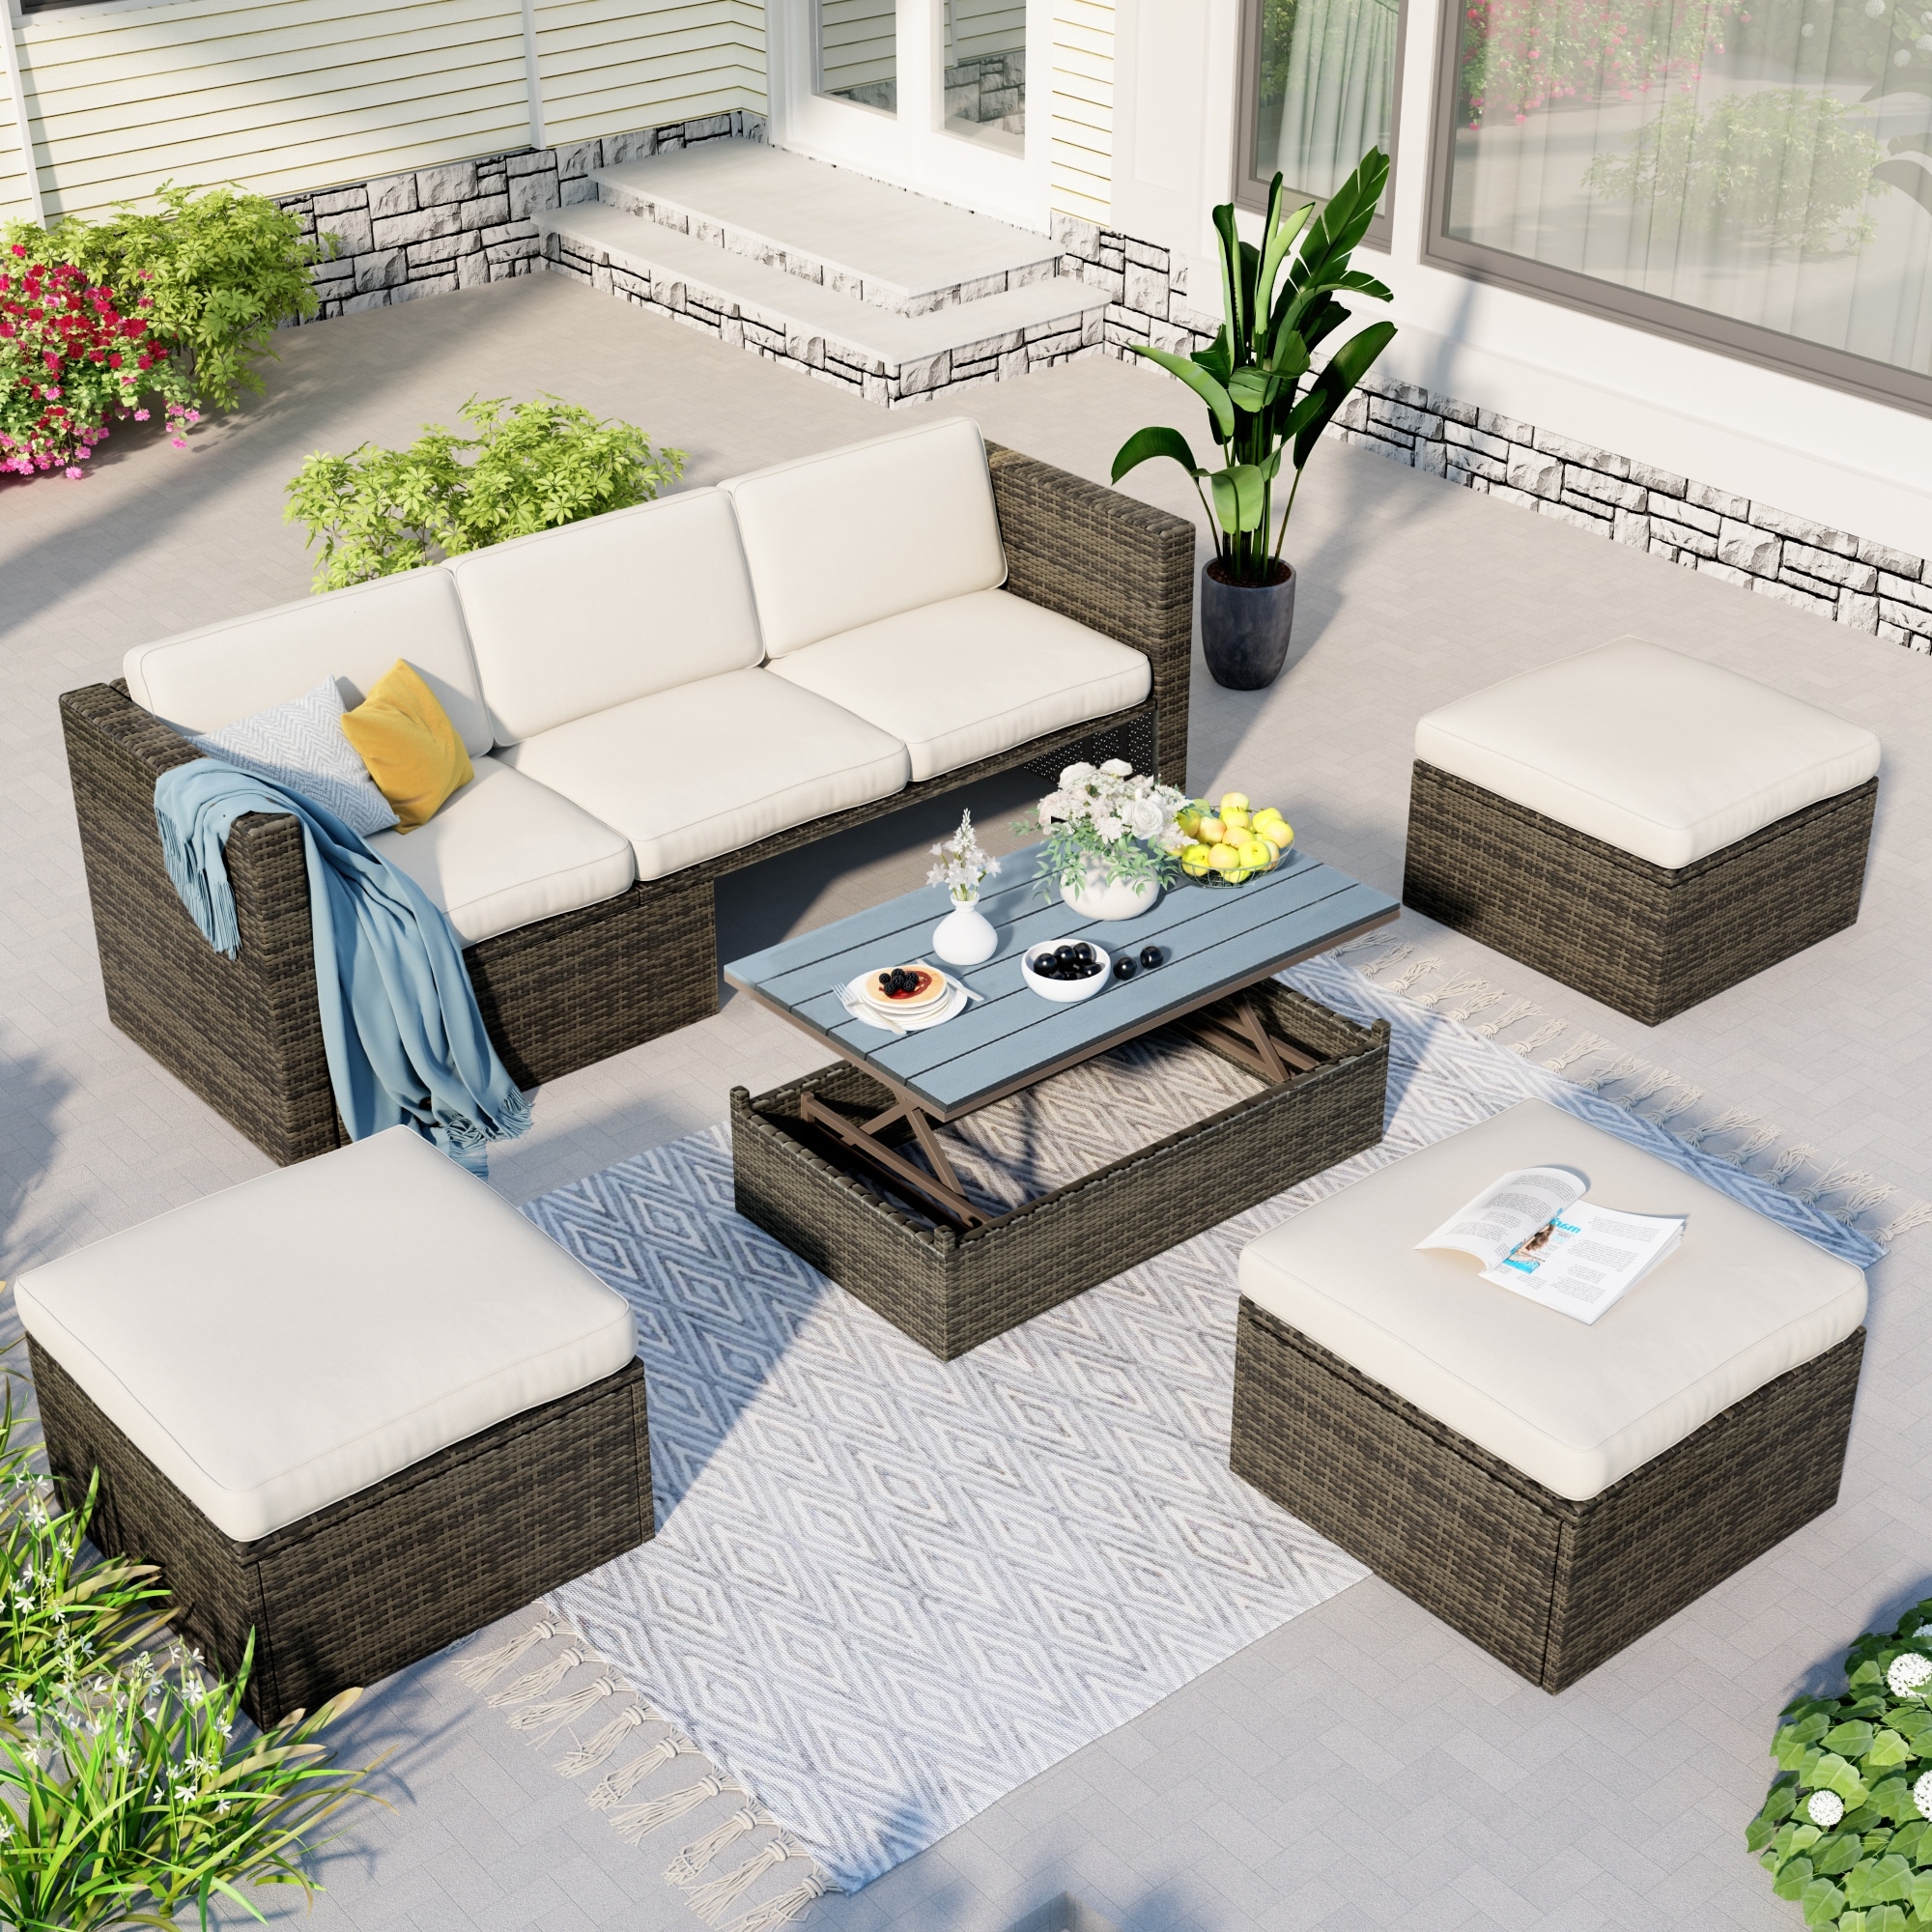 5-piece Outdoor Patio Furniture Set Rattan Wicker Sofa Set With Adustable Backrest  Cushions  Ottomans and Lift Top Coffee Table